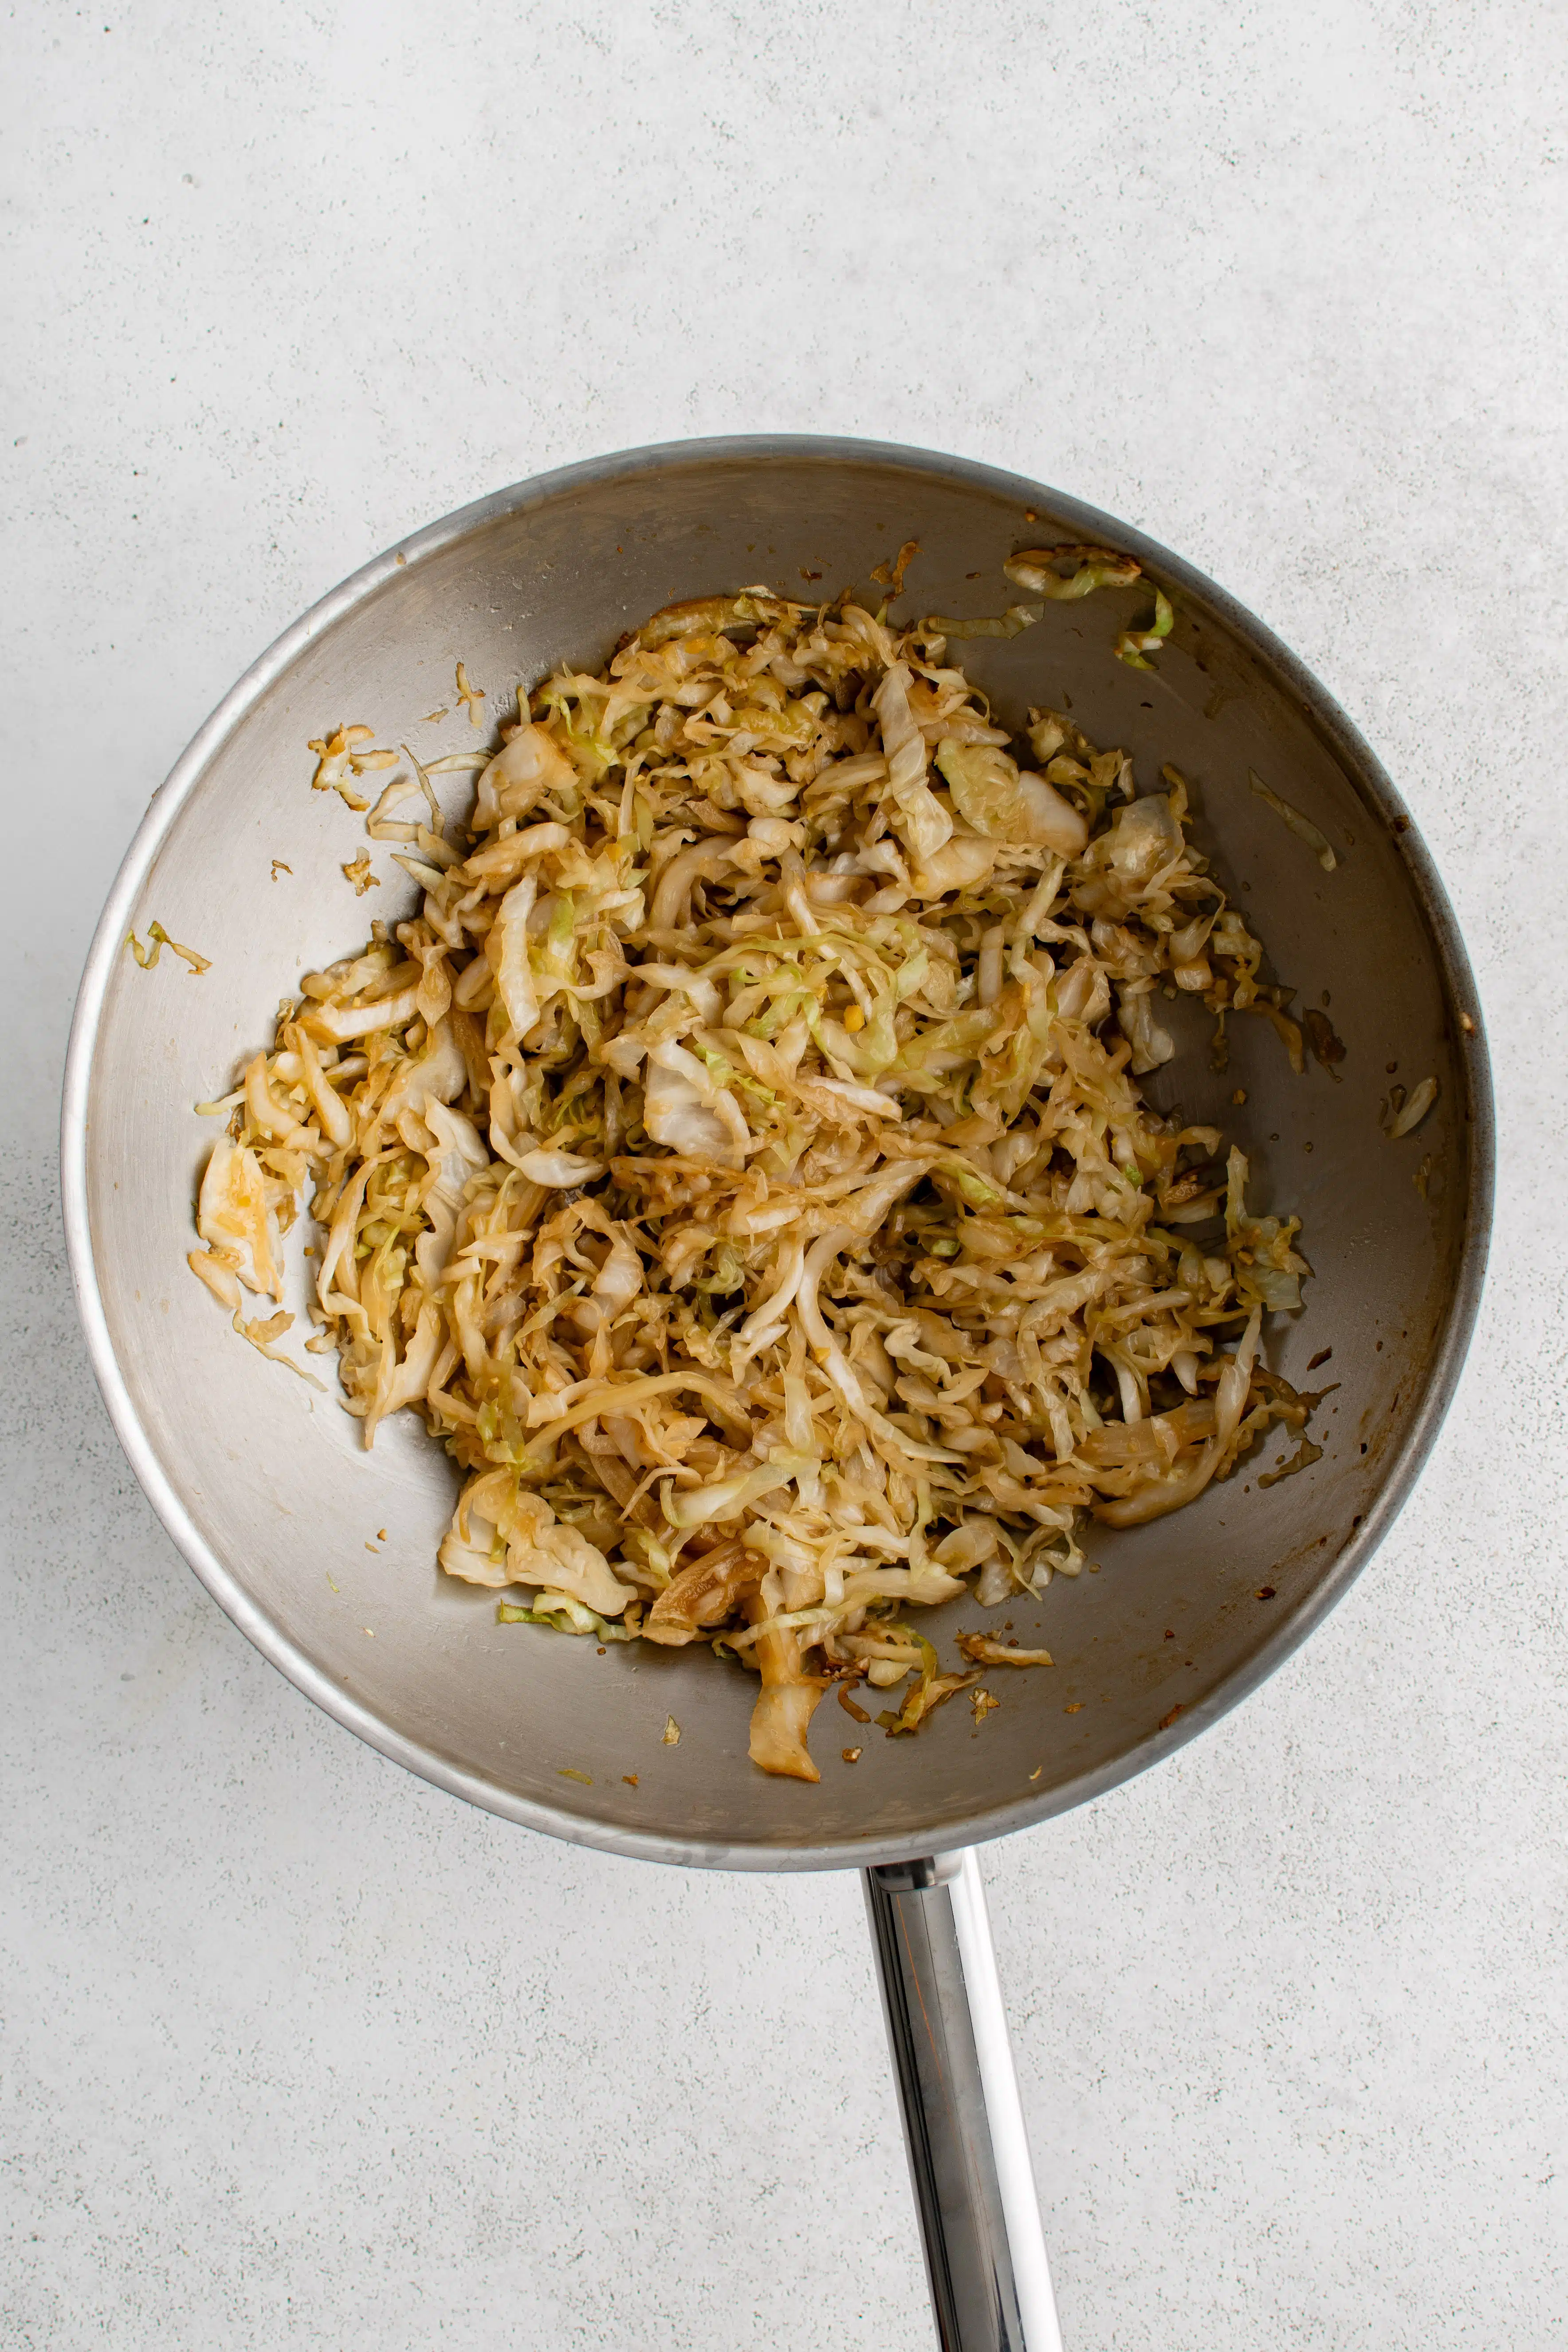 Large stainless steel wok filled with cooked stir-fried cabbage.